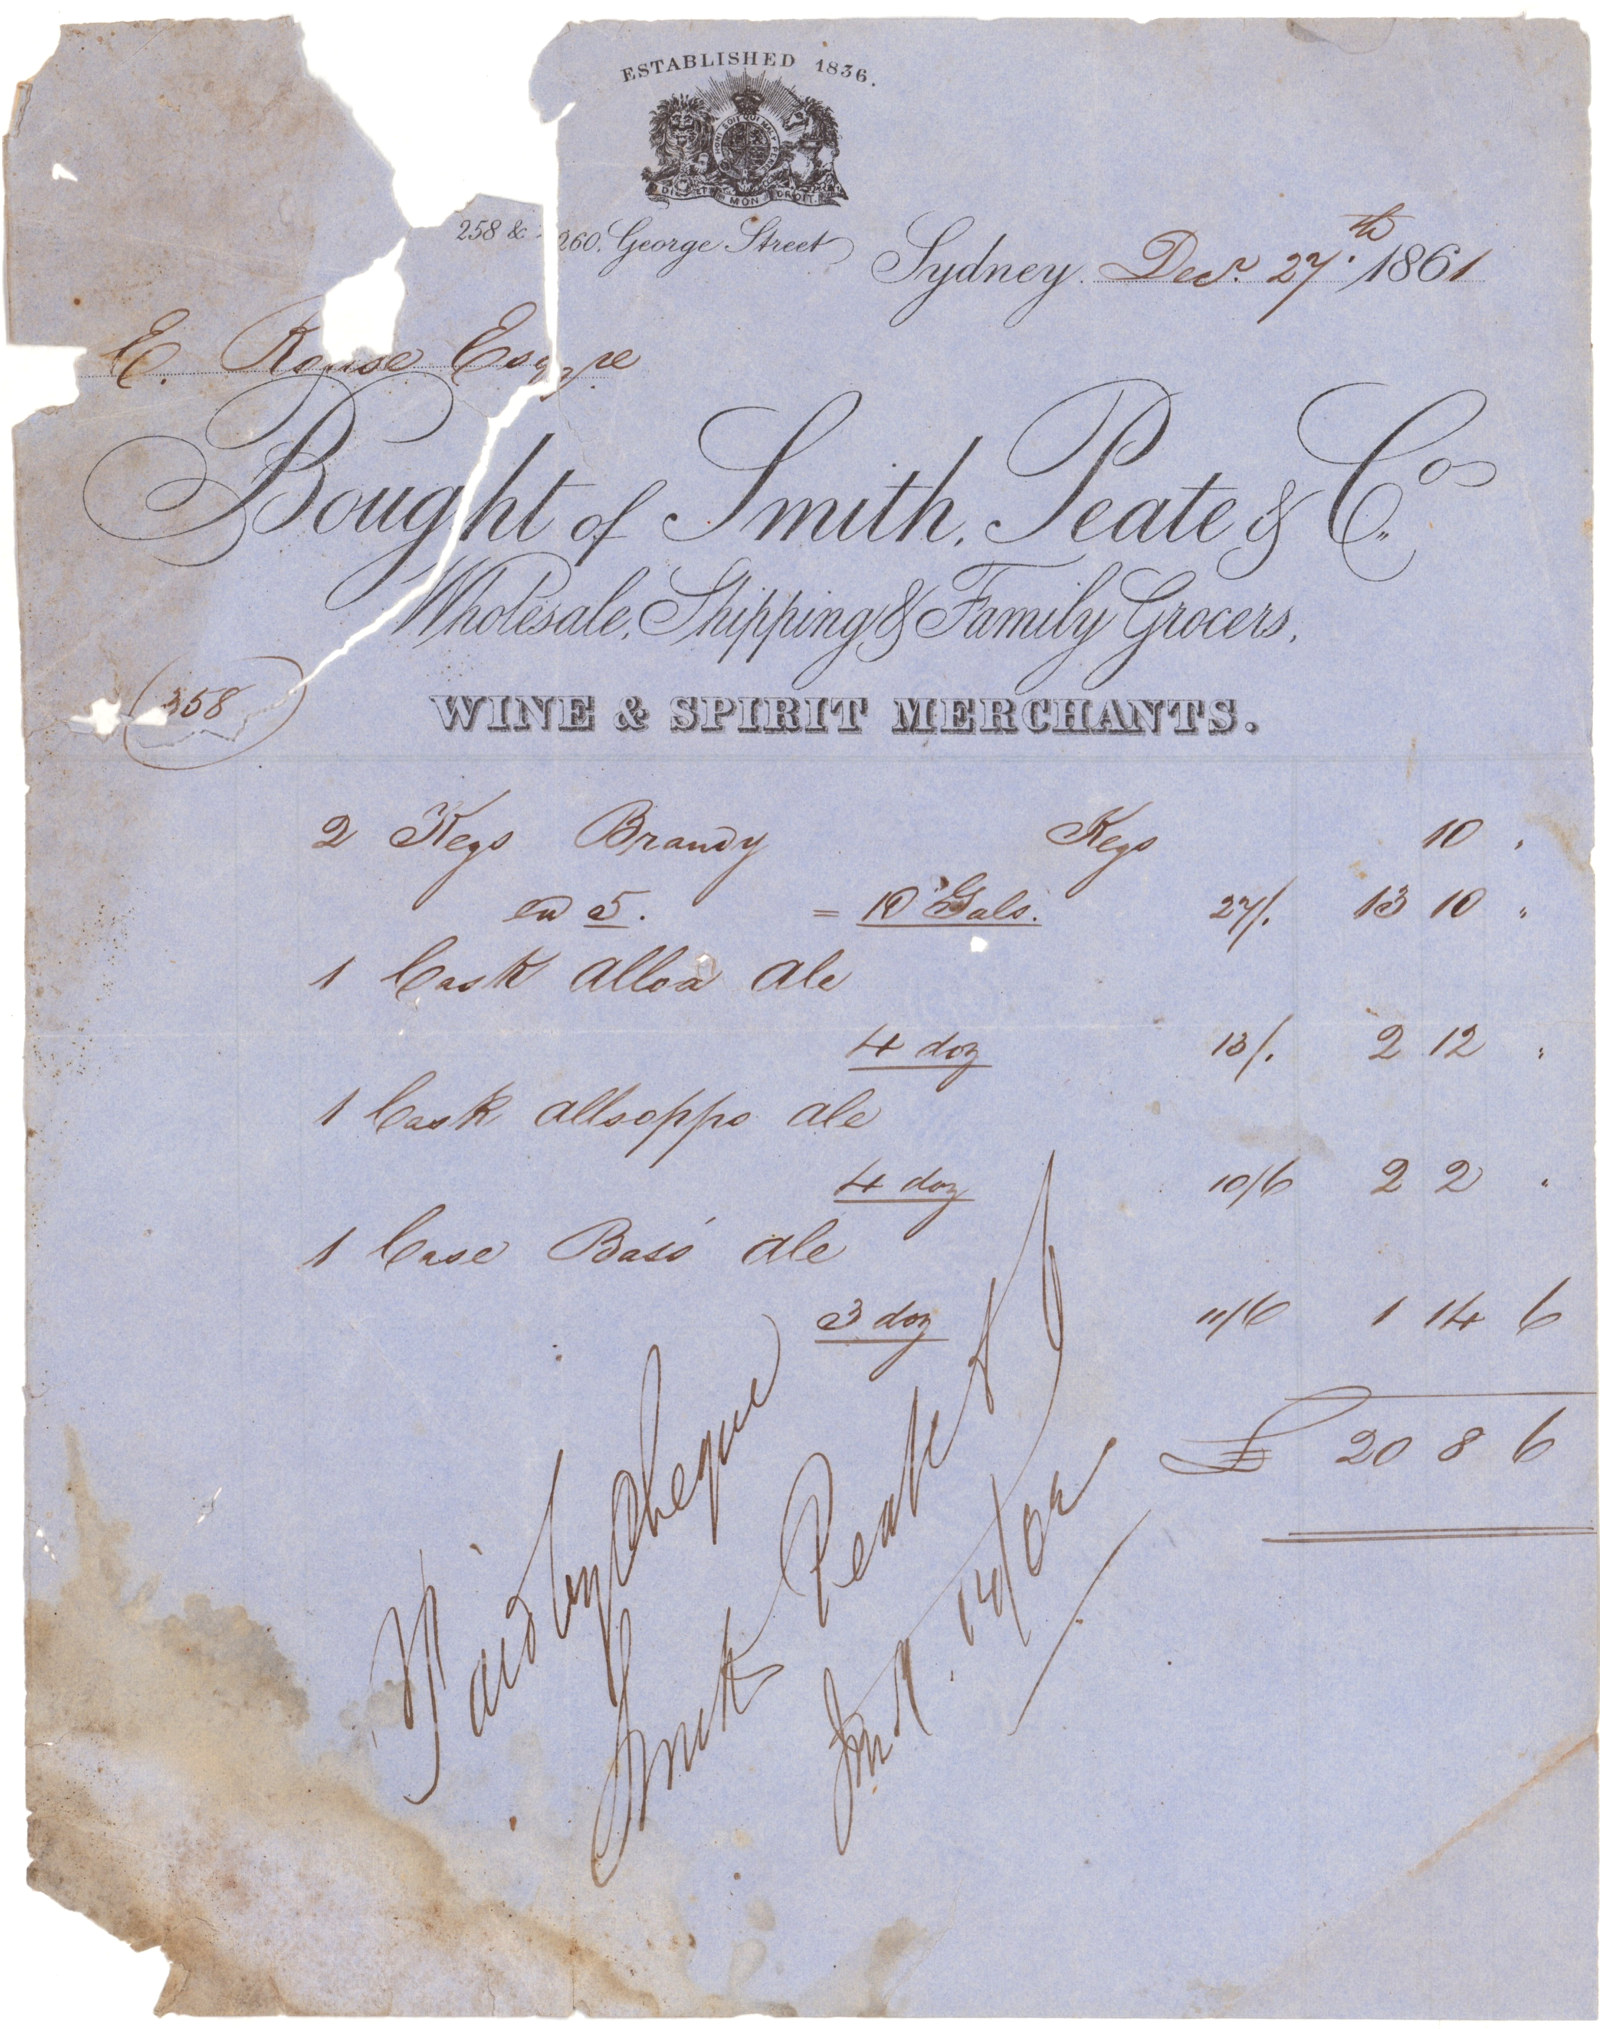 Receipt from Smith, Peate & Co., Wholesale, Shipping & Family Grocers, Wine & Spirit Merchants, 1861